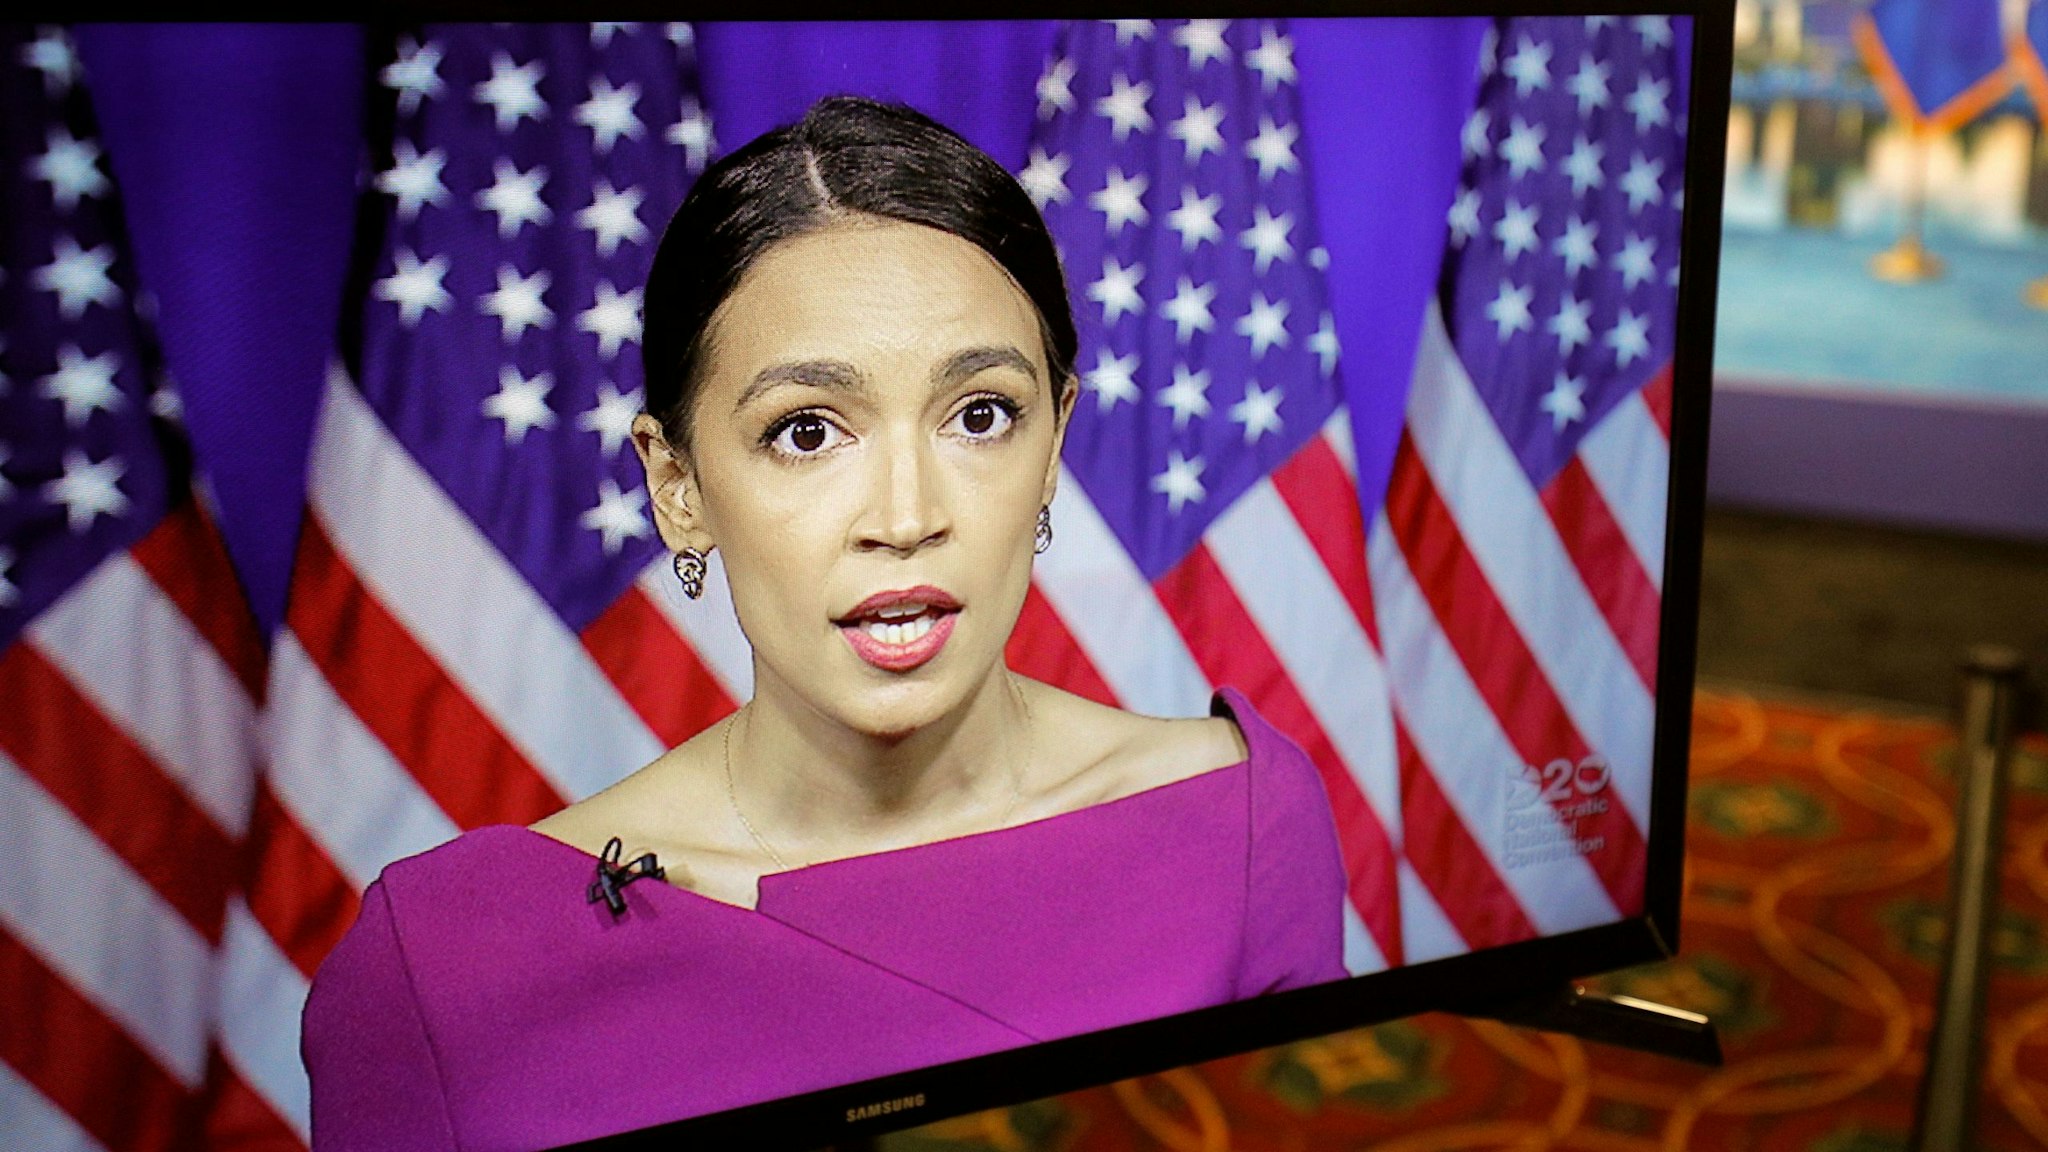 US Rep. Alexandria Ocasio-Cortez (D-NY) seconds the nomination of US Senator Bernie Sanders via video feed during the second day of the Democratic National Convention, being held virtually amid the novel coronavirus pandemic, at its hosting site in Milwaukee, Wisconsin, on August 18, 2020.